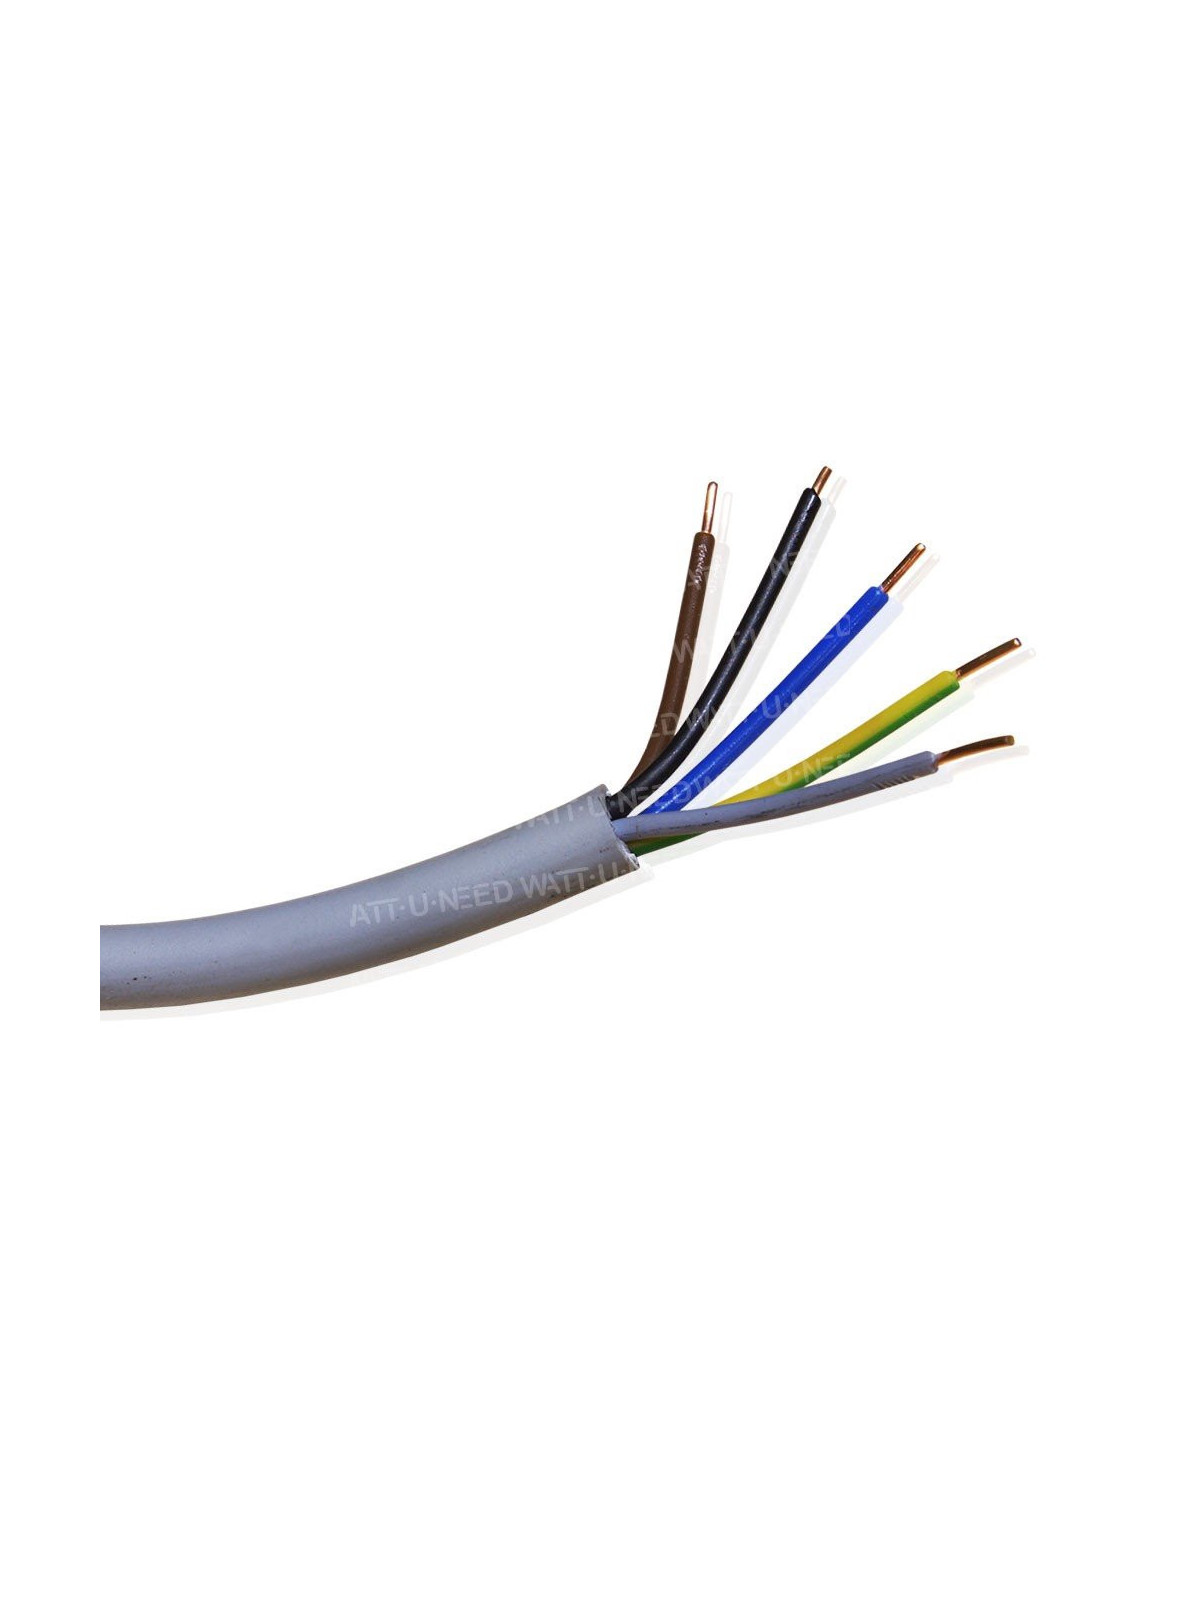 XVB 5G1.5 mm - 1m electric cable